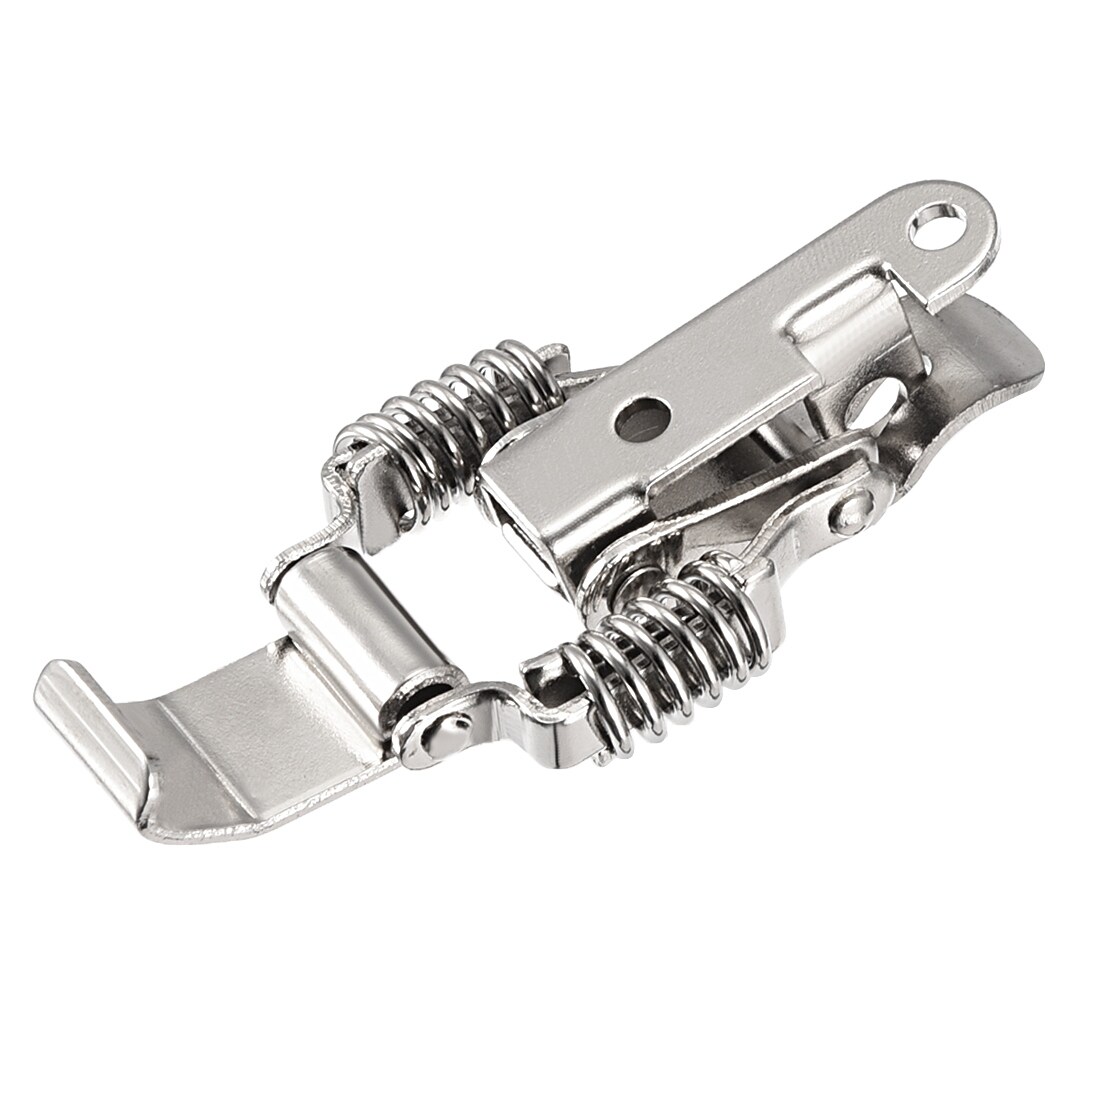 2.87 SUS304 Stainless Steel Draw Toggle Latch with Spring-steel Hook - 2  Pcs